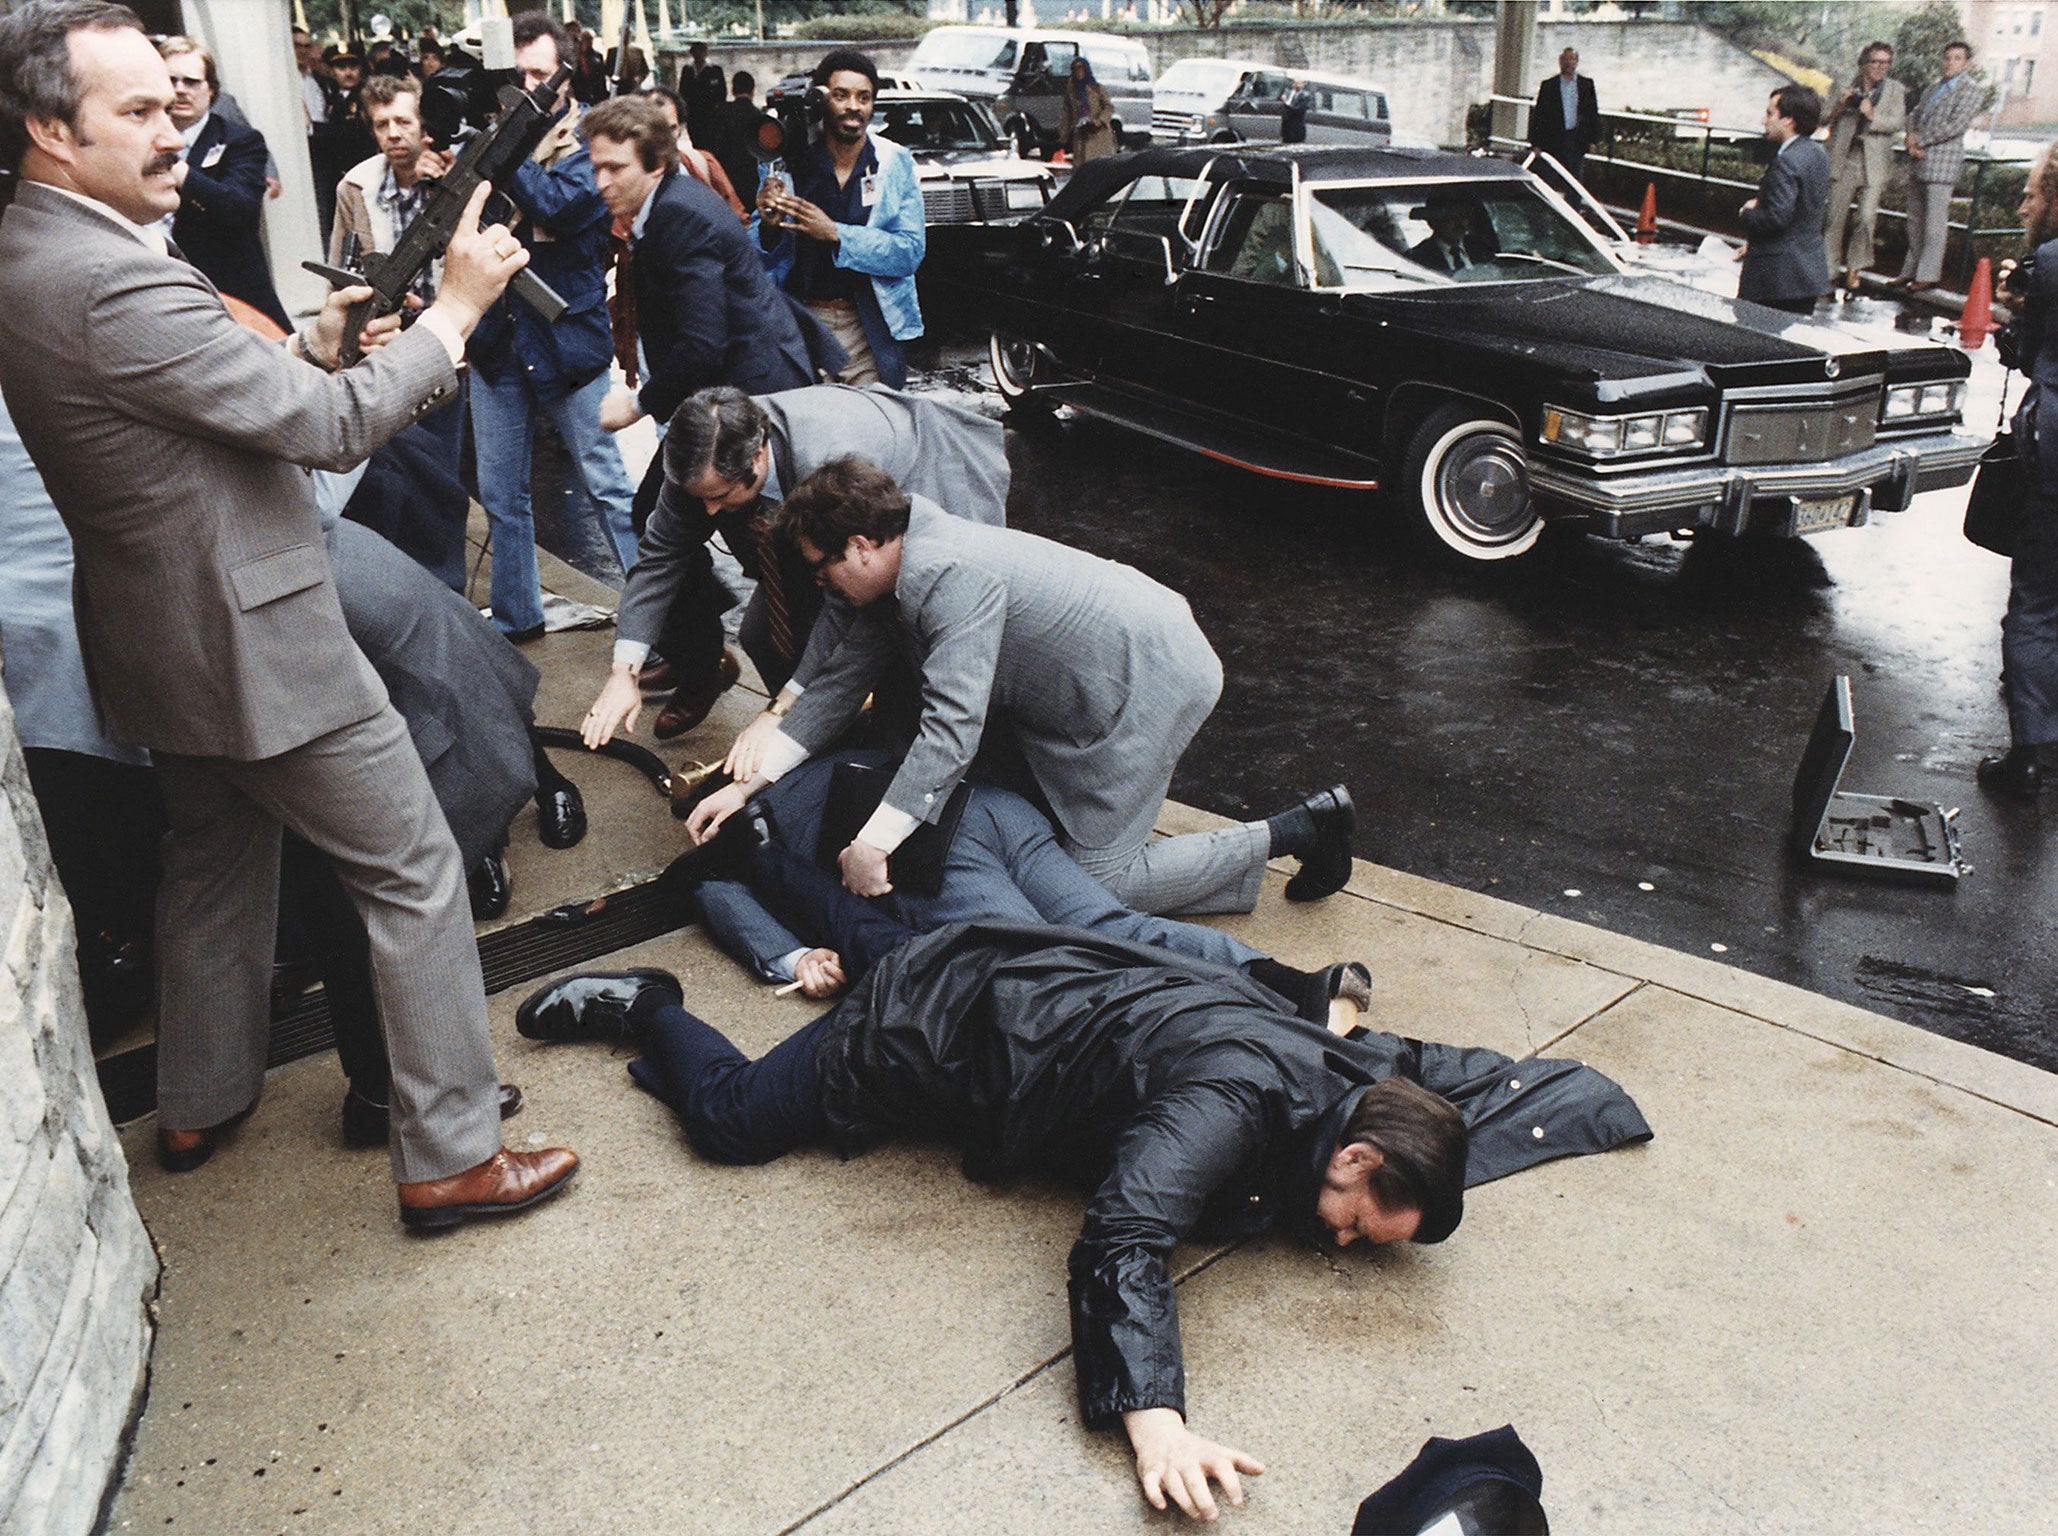 James Brady, in light blue suit, lies injured after attack on Ronald Reagan